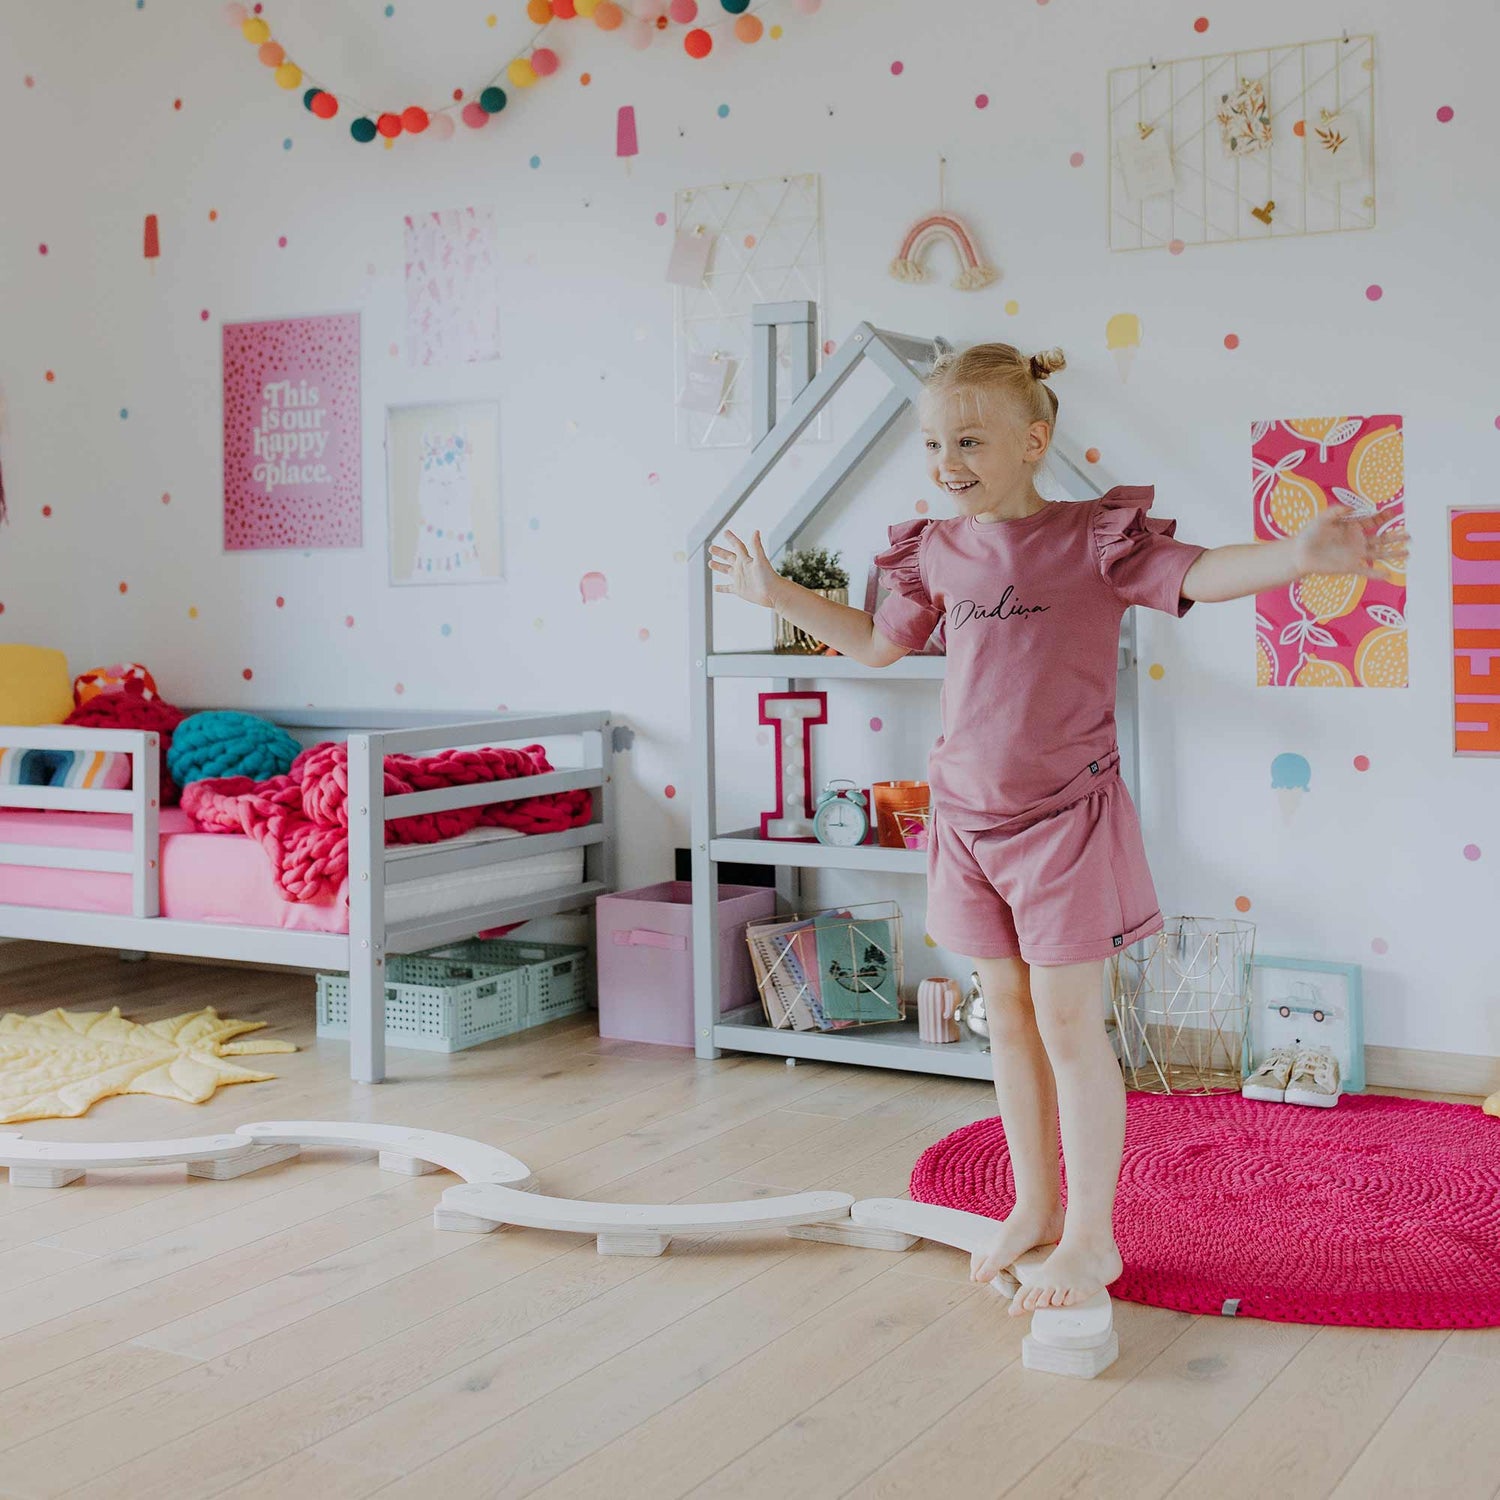 A little girl standing in a pink and white room.